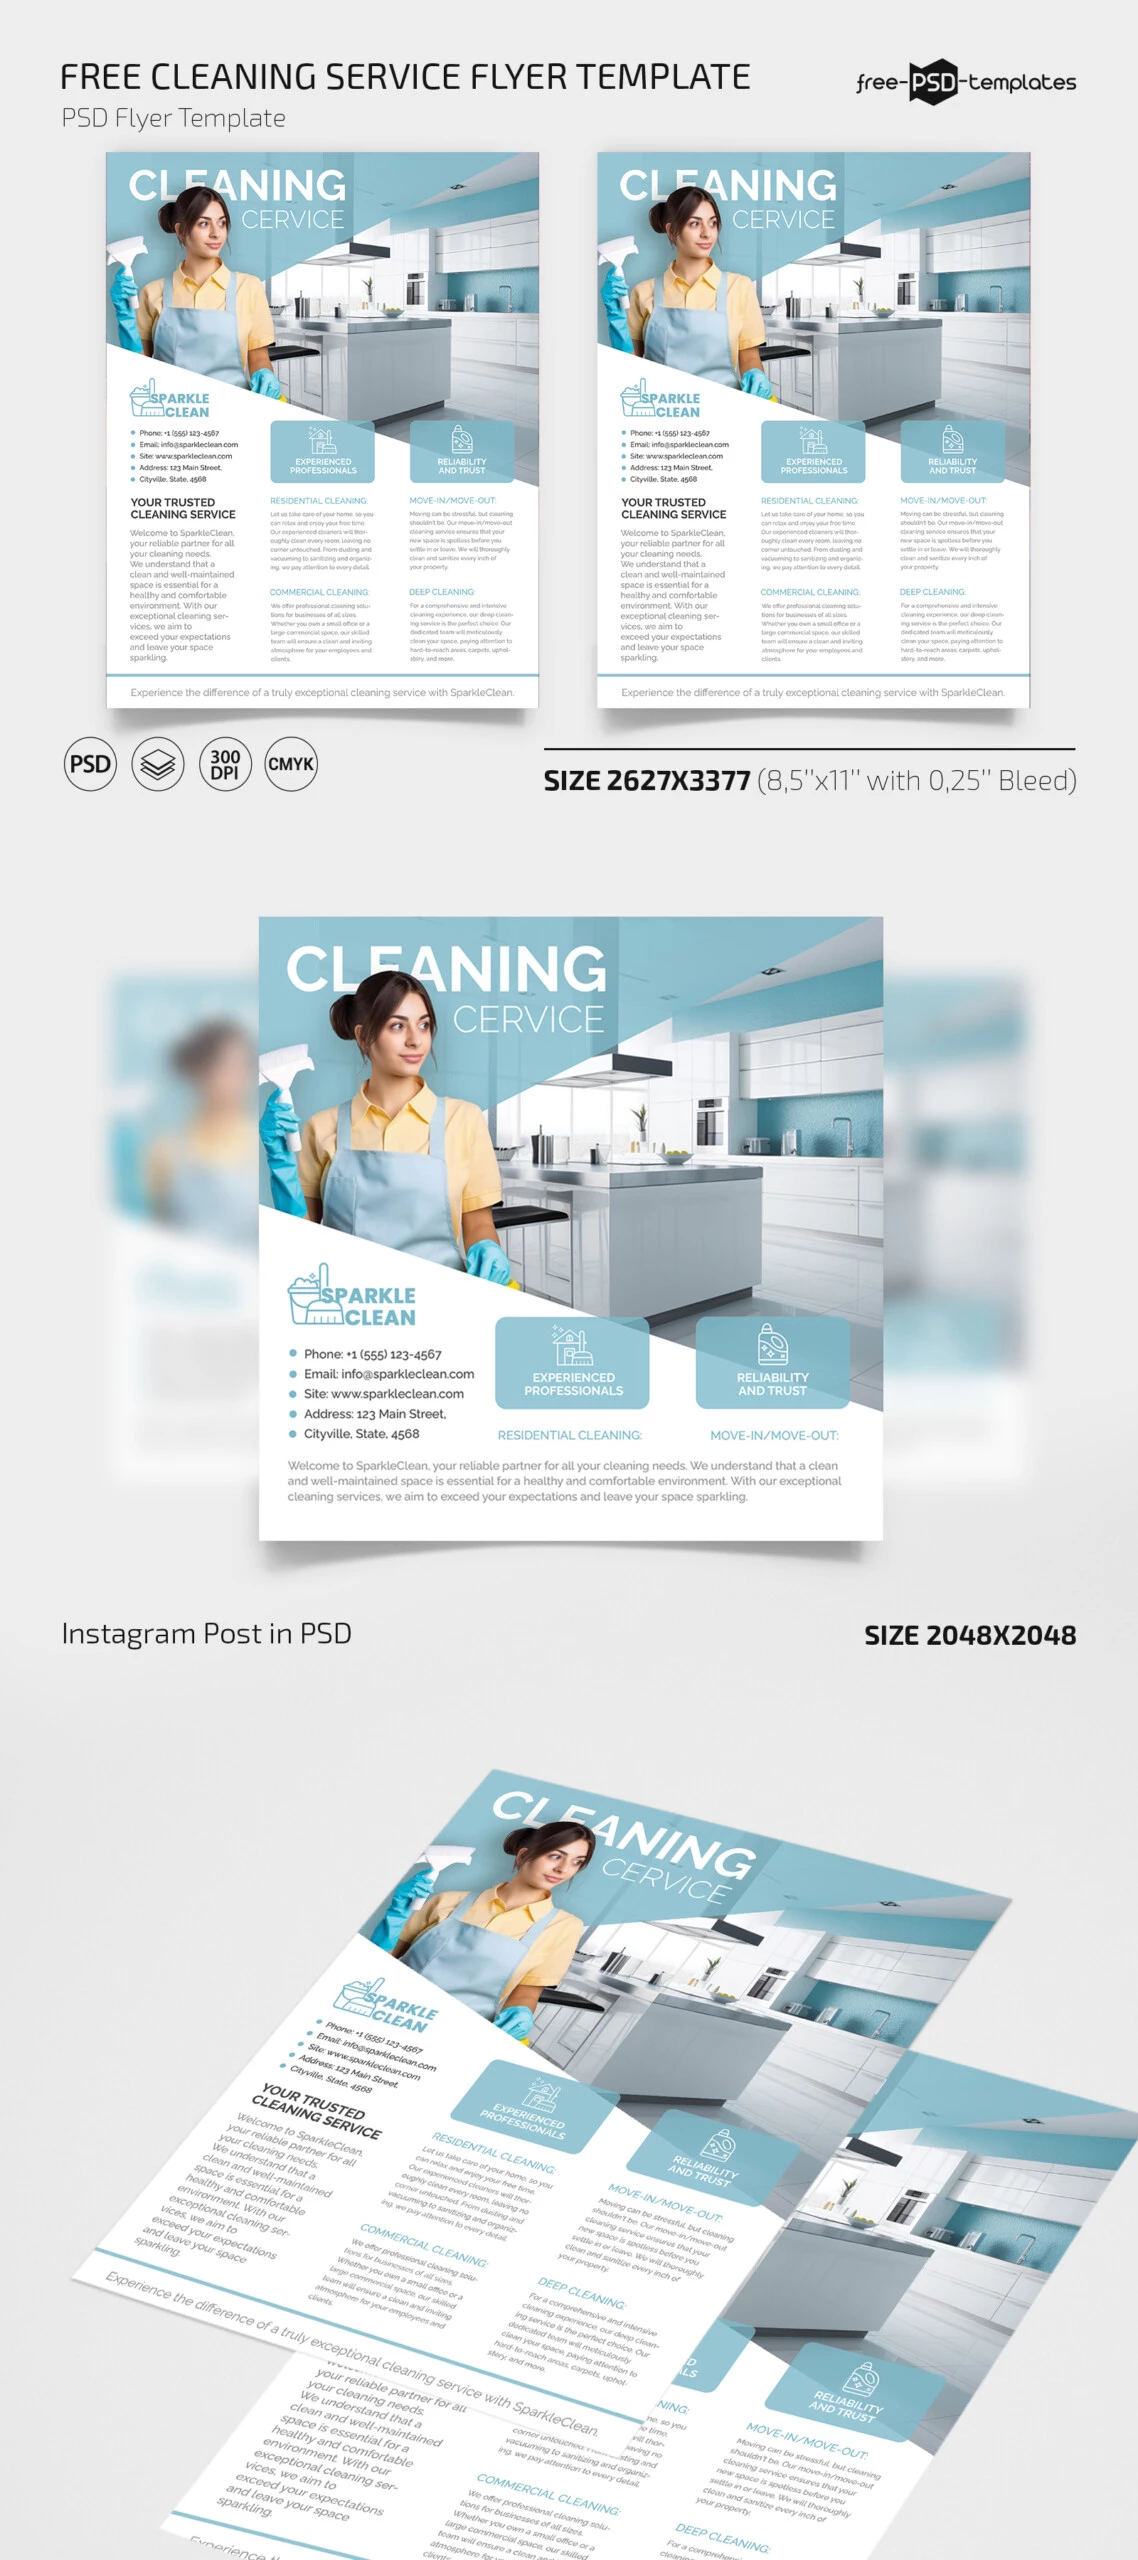 Free Cleaning Service Flyer Template PSD